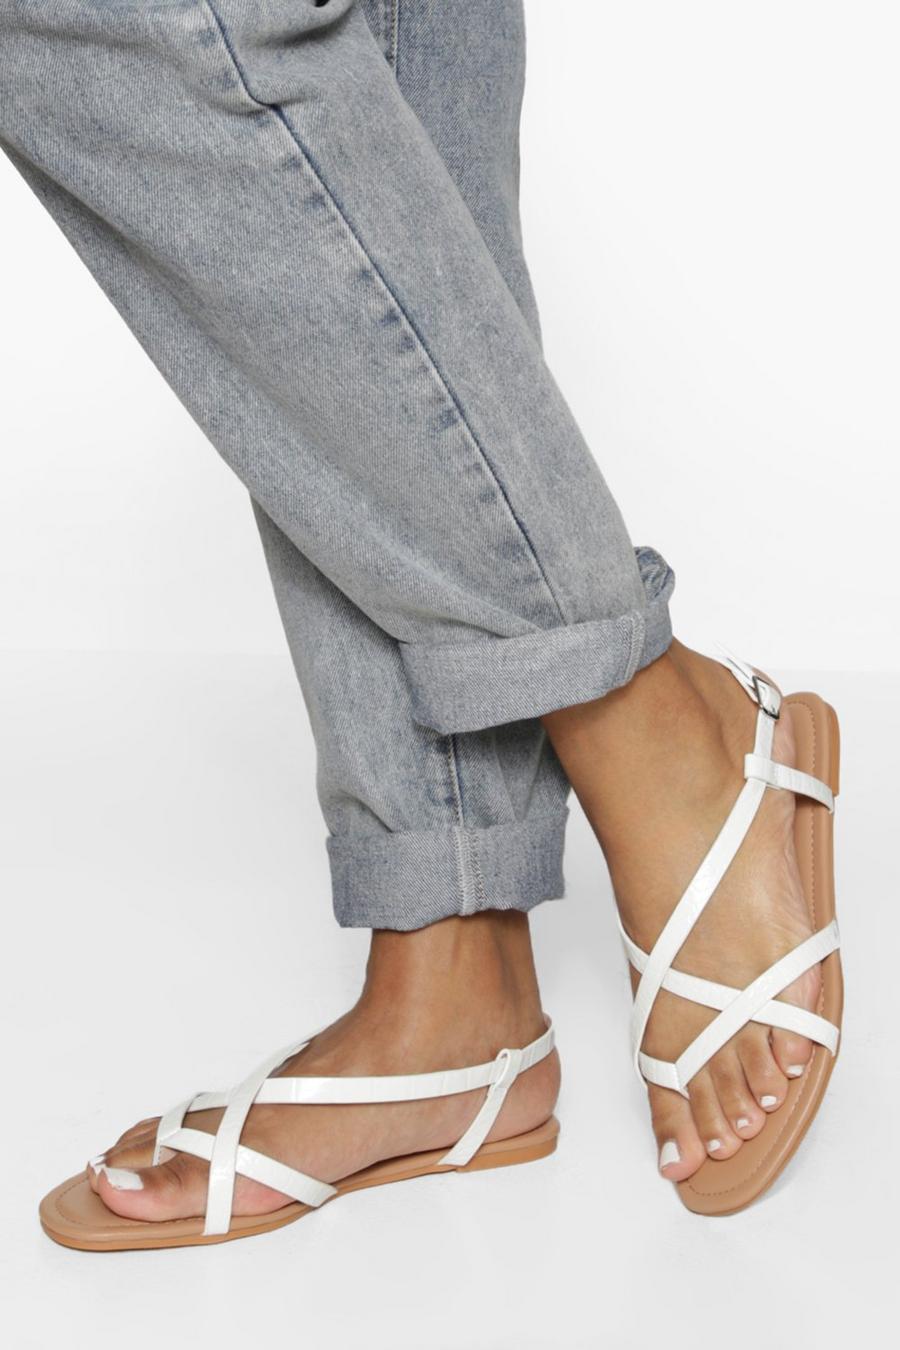 White Wide Fit Croc Toe Post Basic Strappy Sandal